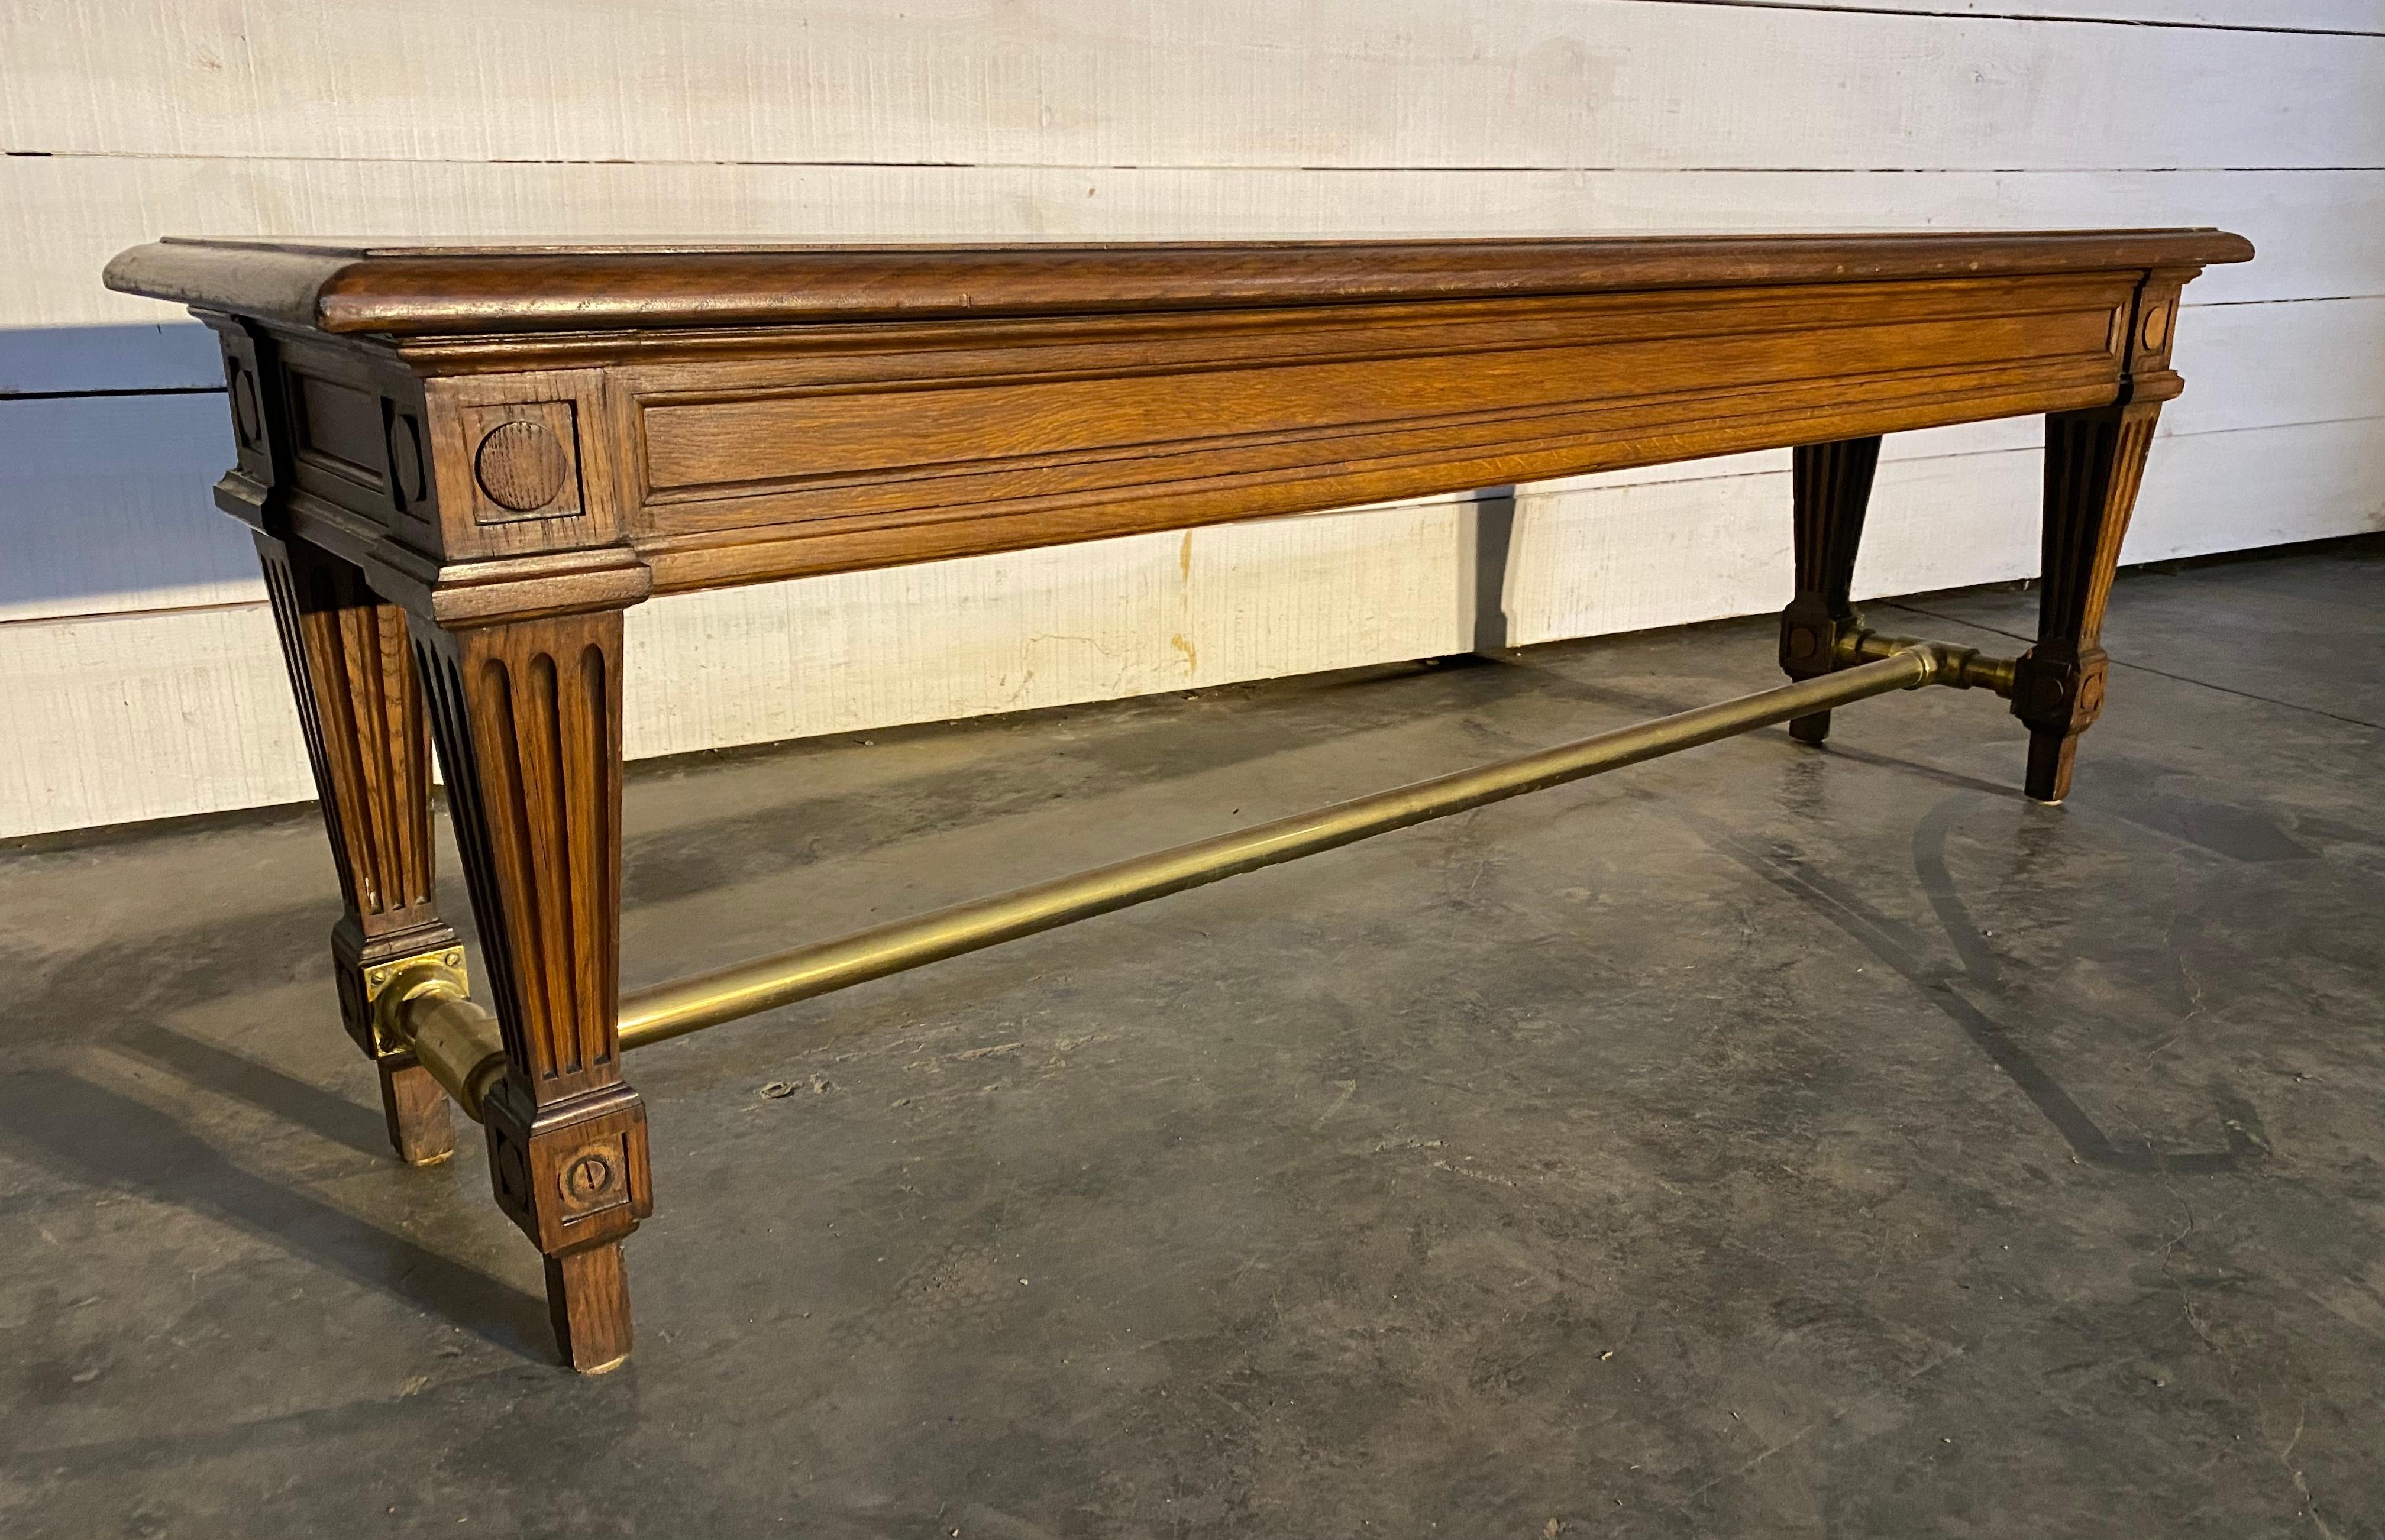 Perhaps one of the finest hall benches I have ever seen. This came from the bank of France in Paris and is of excellent quality and dating to the end of the 19th century very arts and crafts in design. Made from solid oak with a brass stretcher.